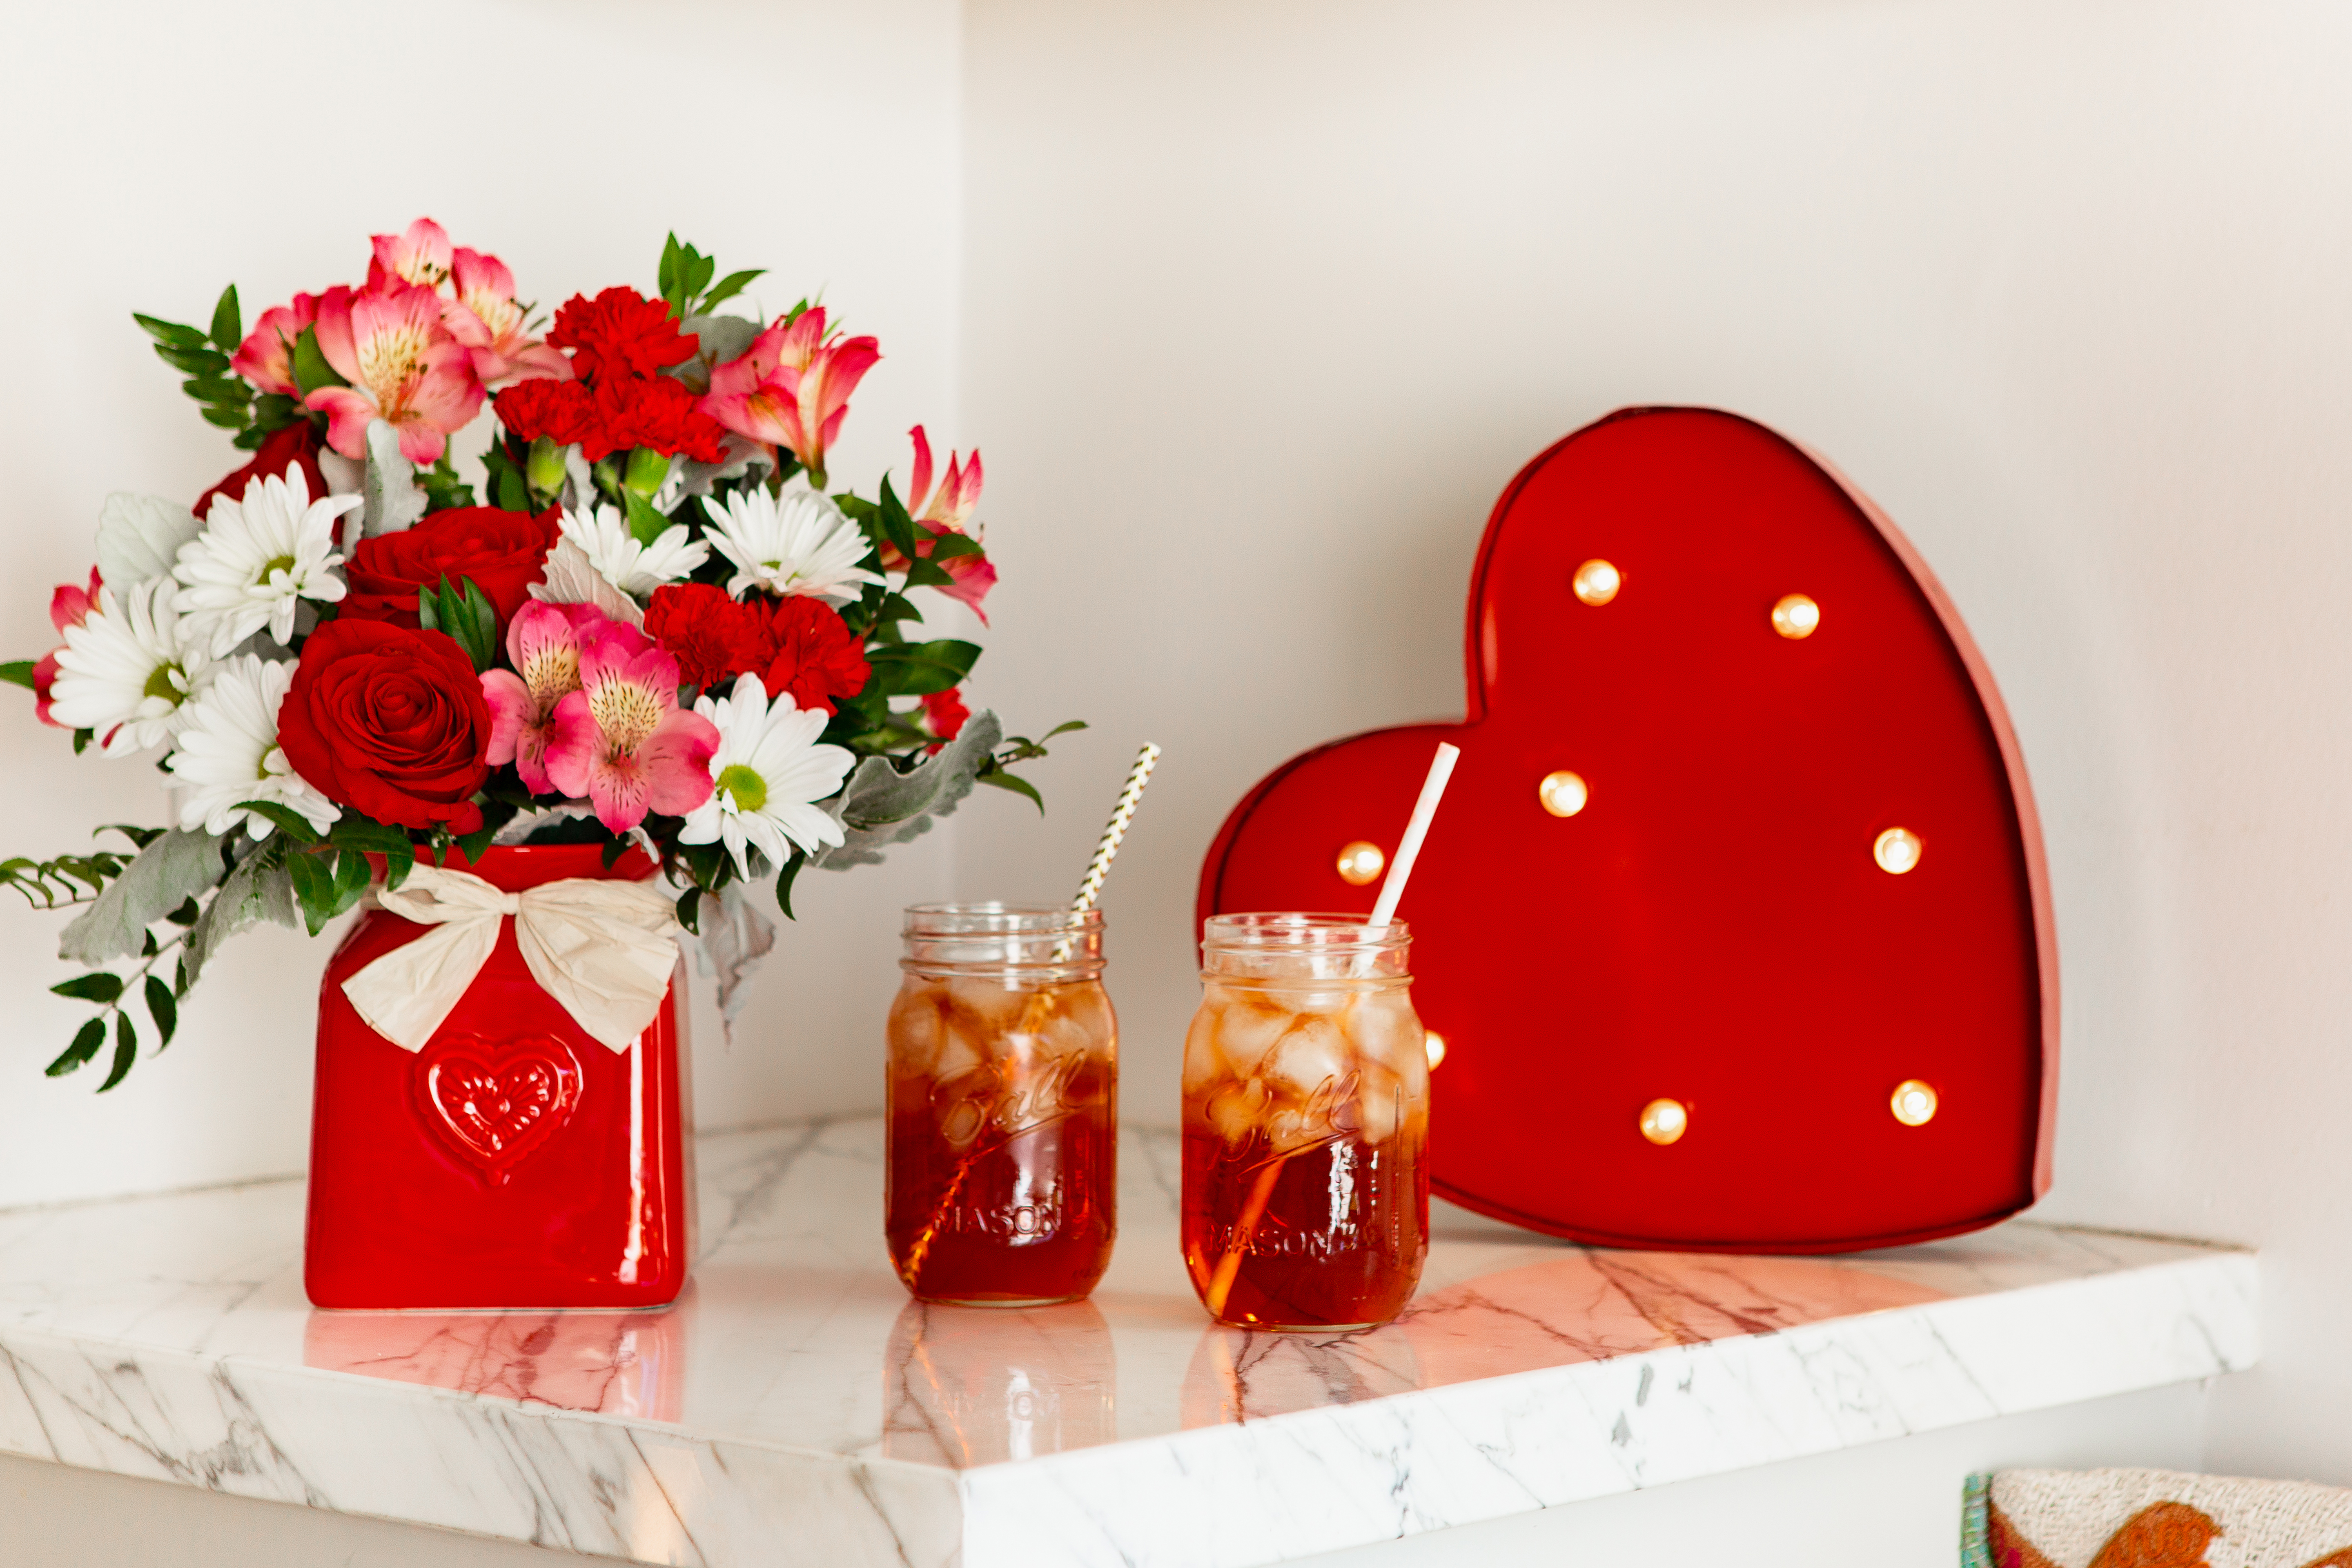 Red roses, white daises, and more in a red vase next to tea glasses and a red heart